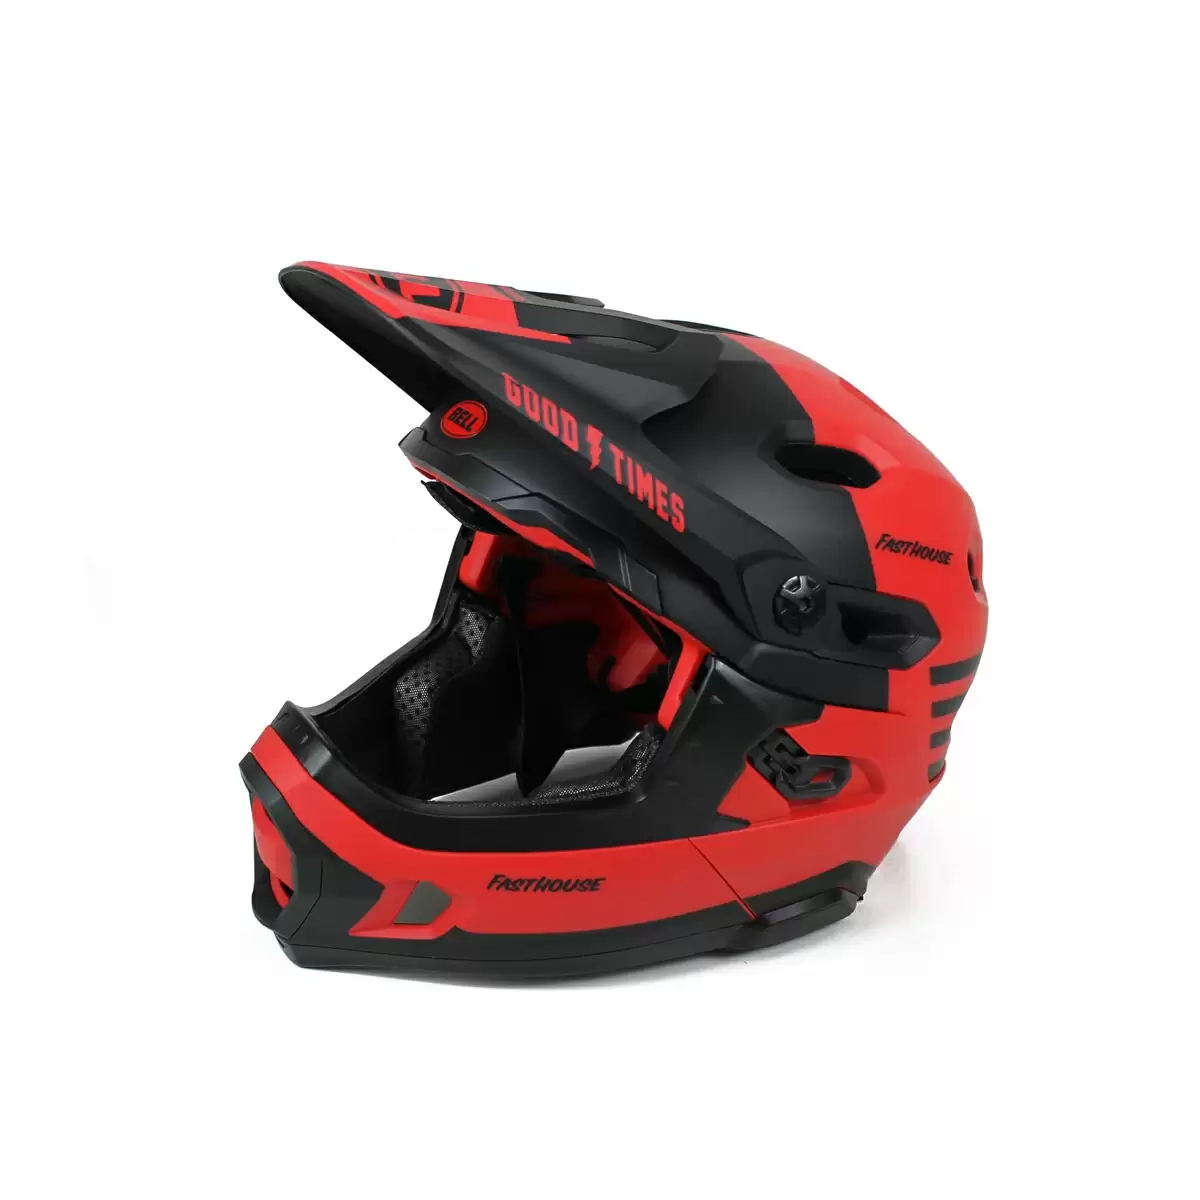 Helmet Super DH MIPS Fasthouse Red Size M (55-59cm) #1